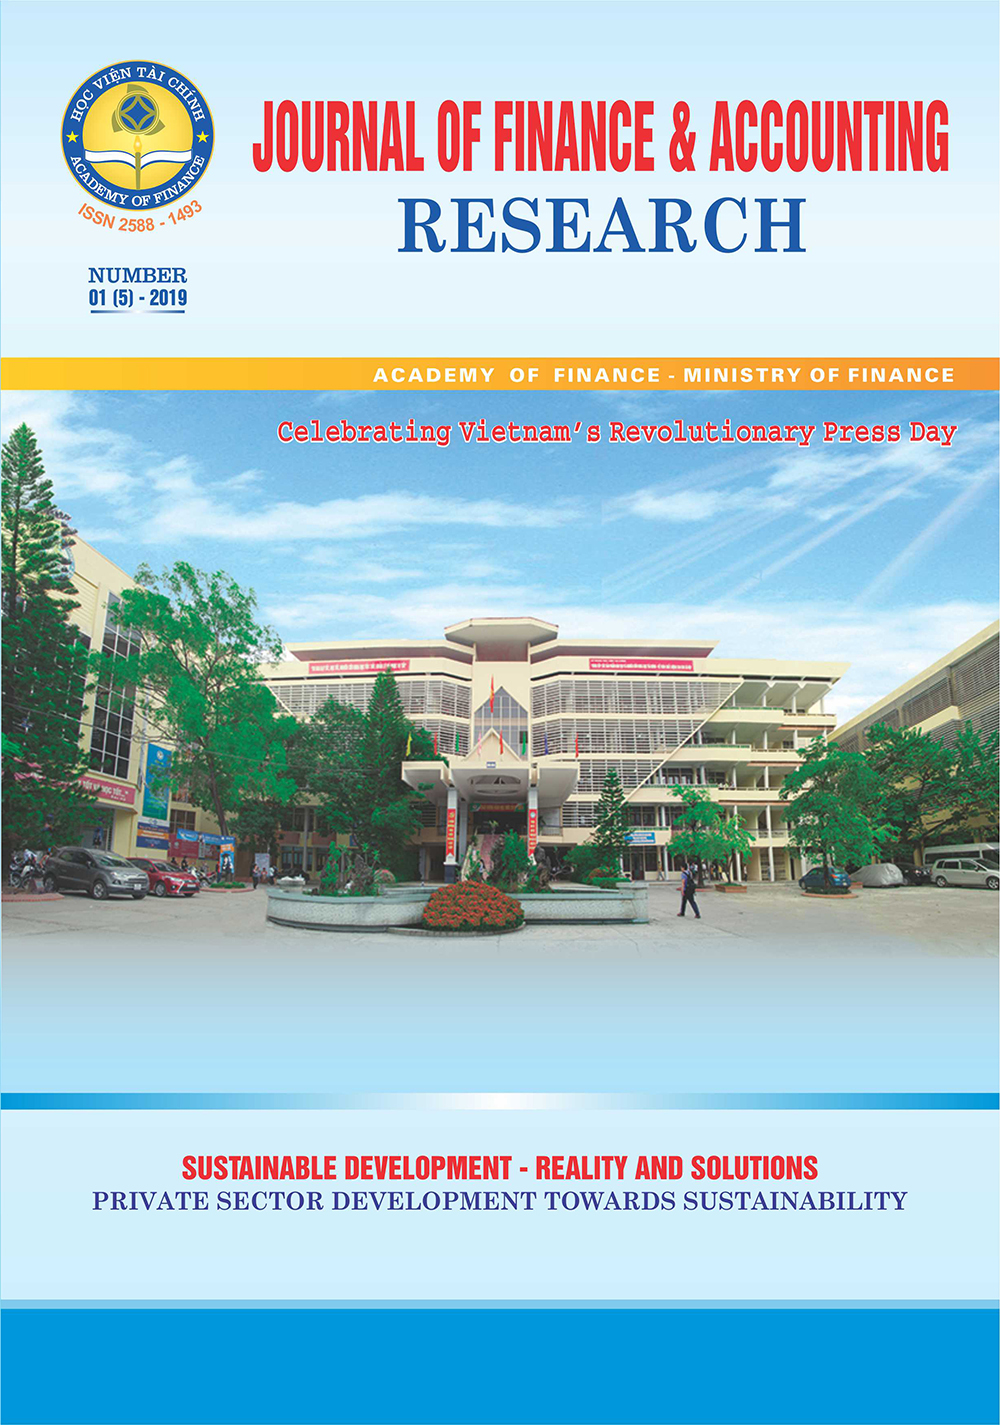 Journal of Finance & Accounting Research